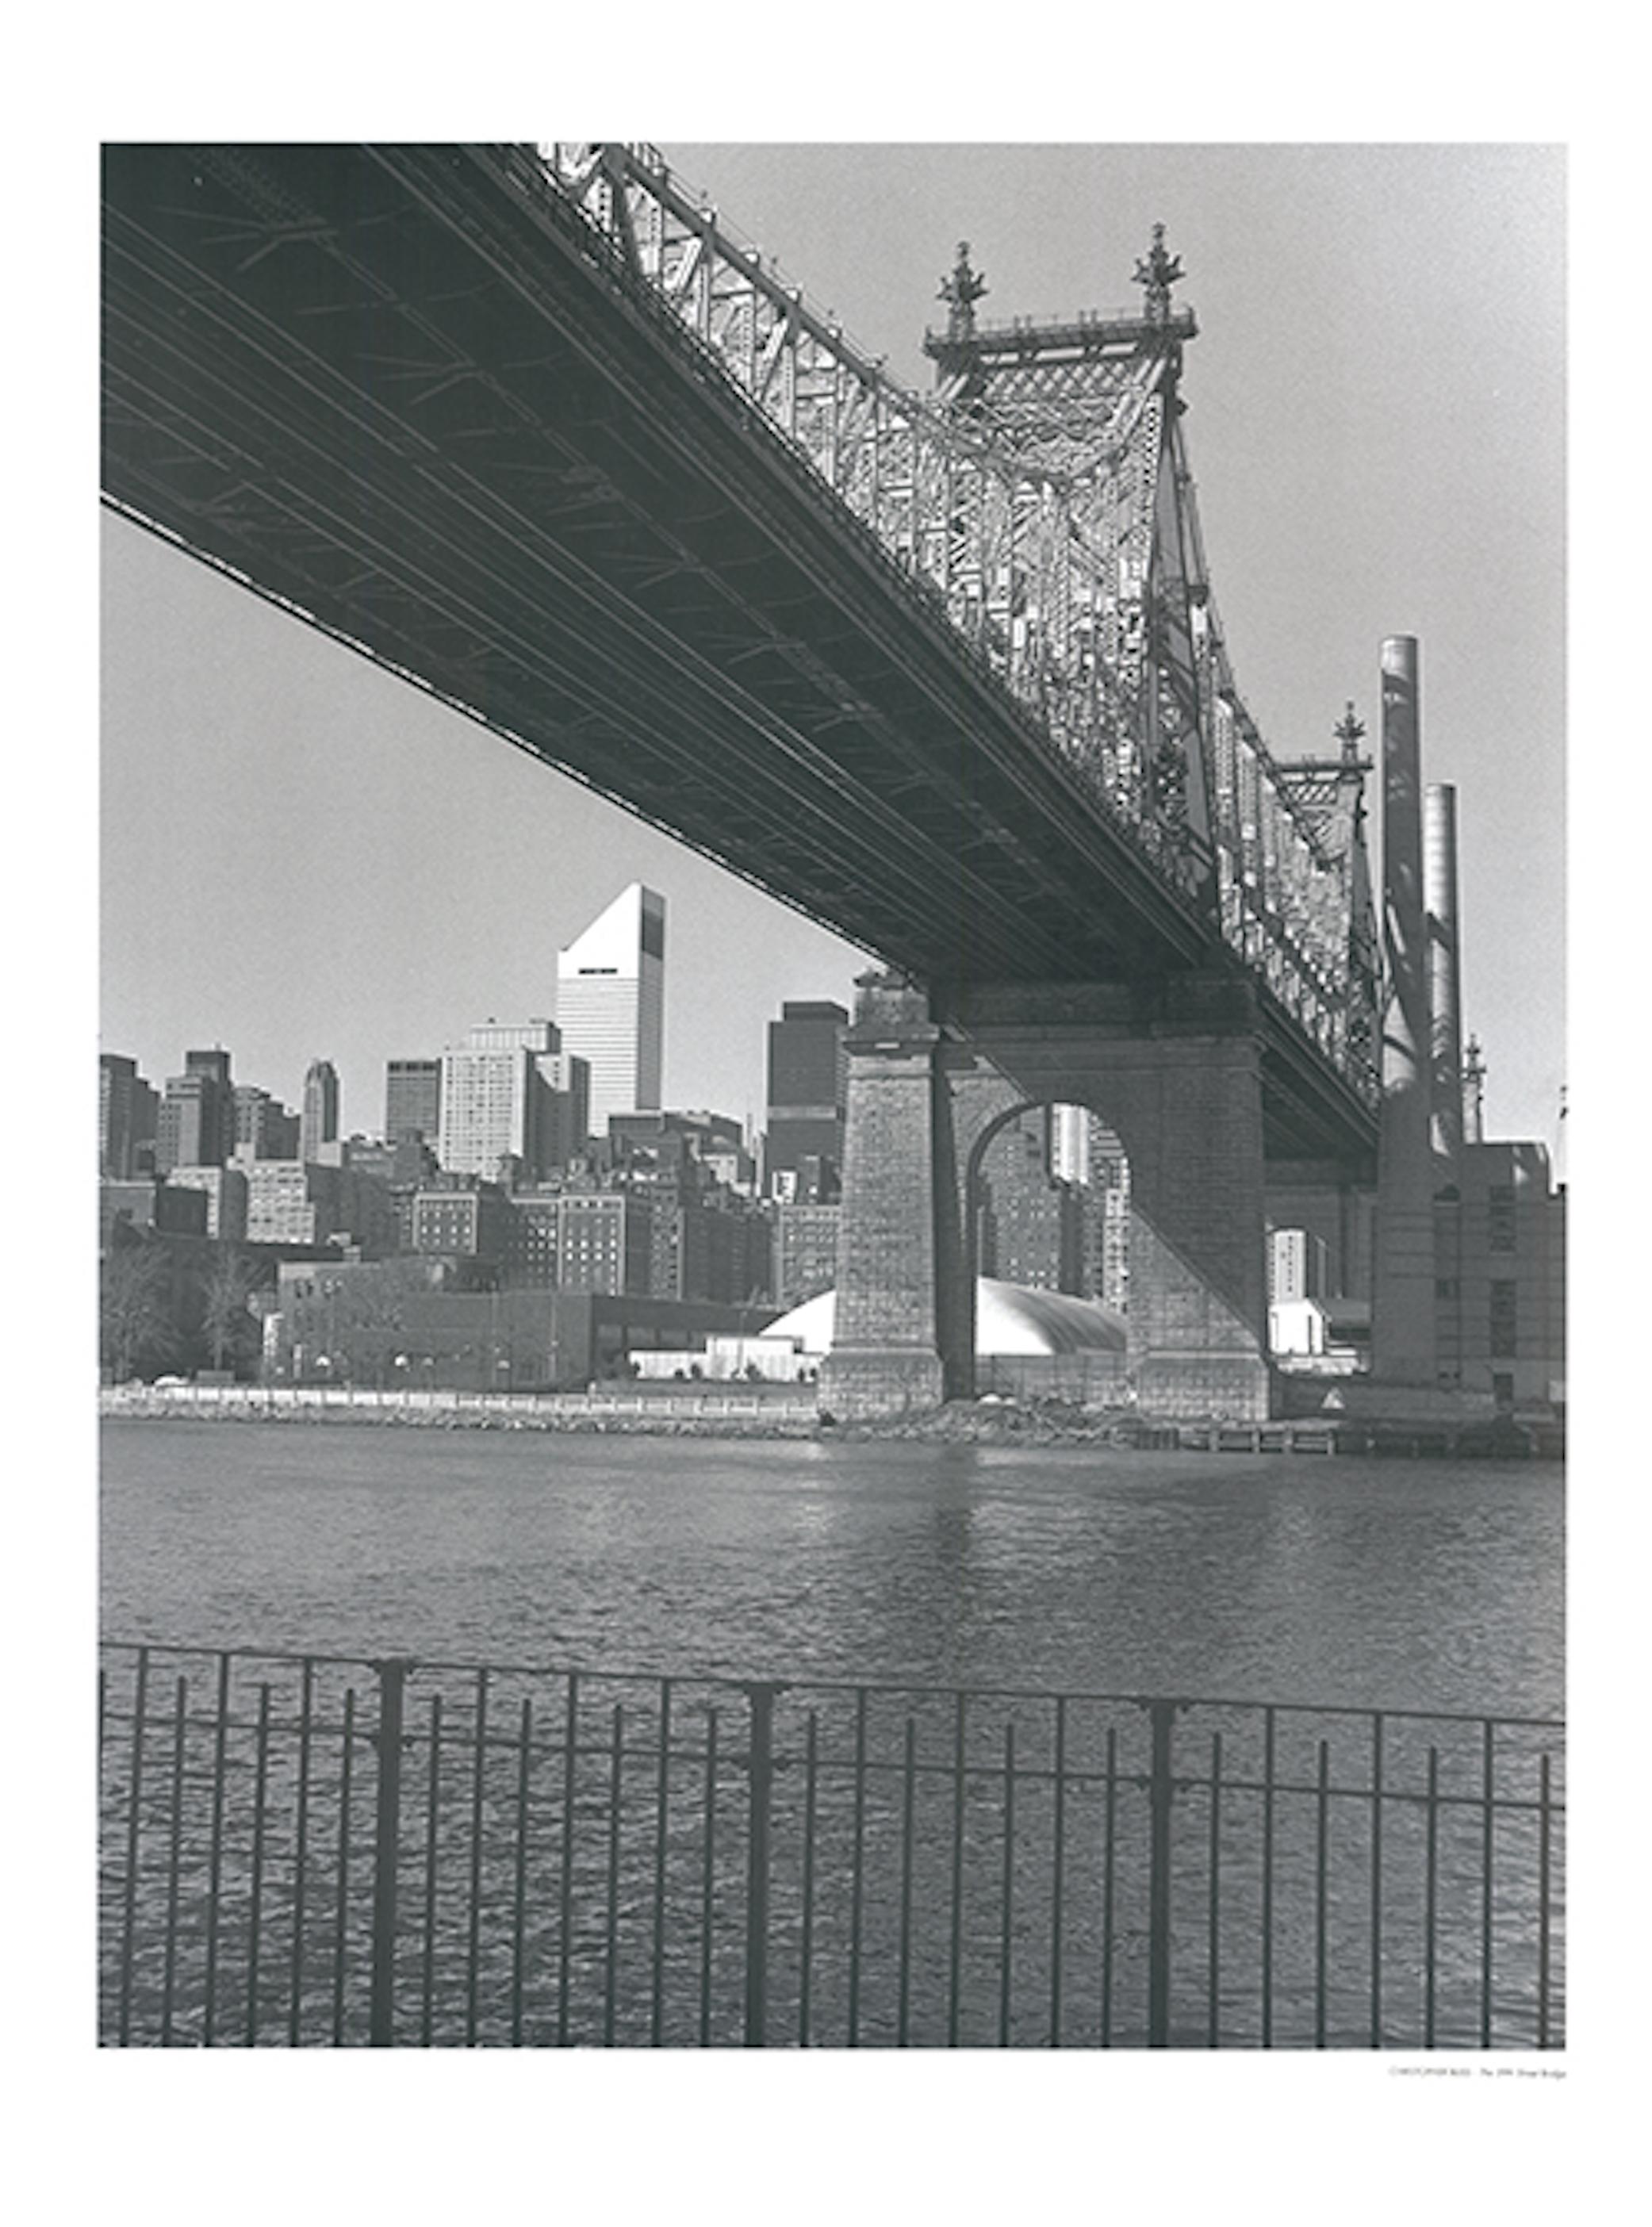 The 59th Street Brigde - Christopher Bliss - Photography For Sale 2